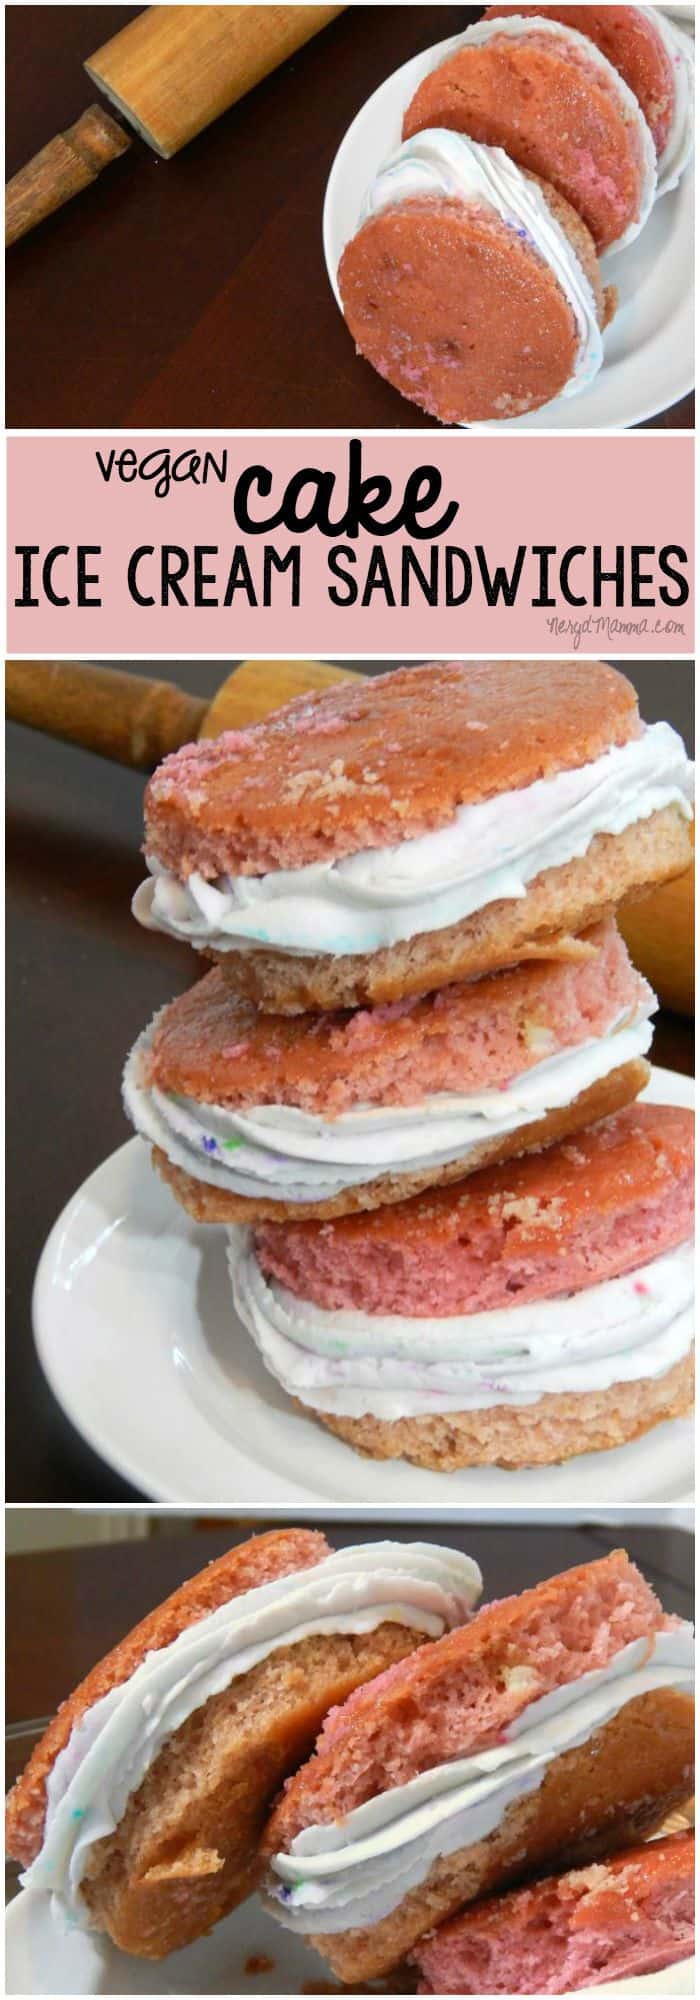 These easy ice cream sandwiches are made with cake and have NO DAIRY! LOVE!